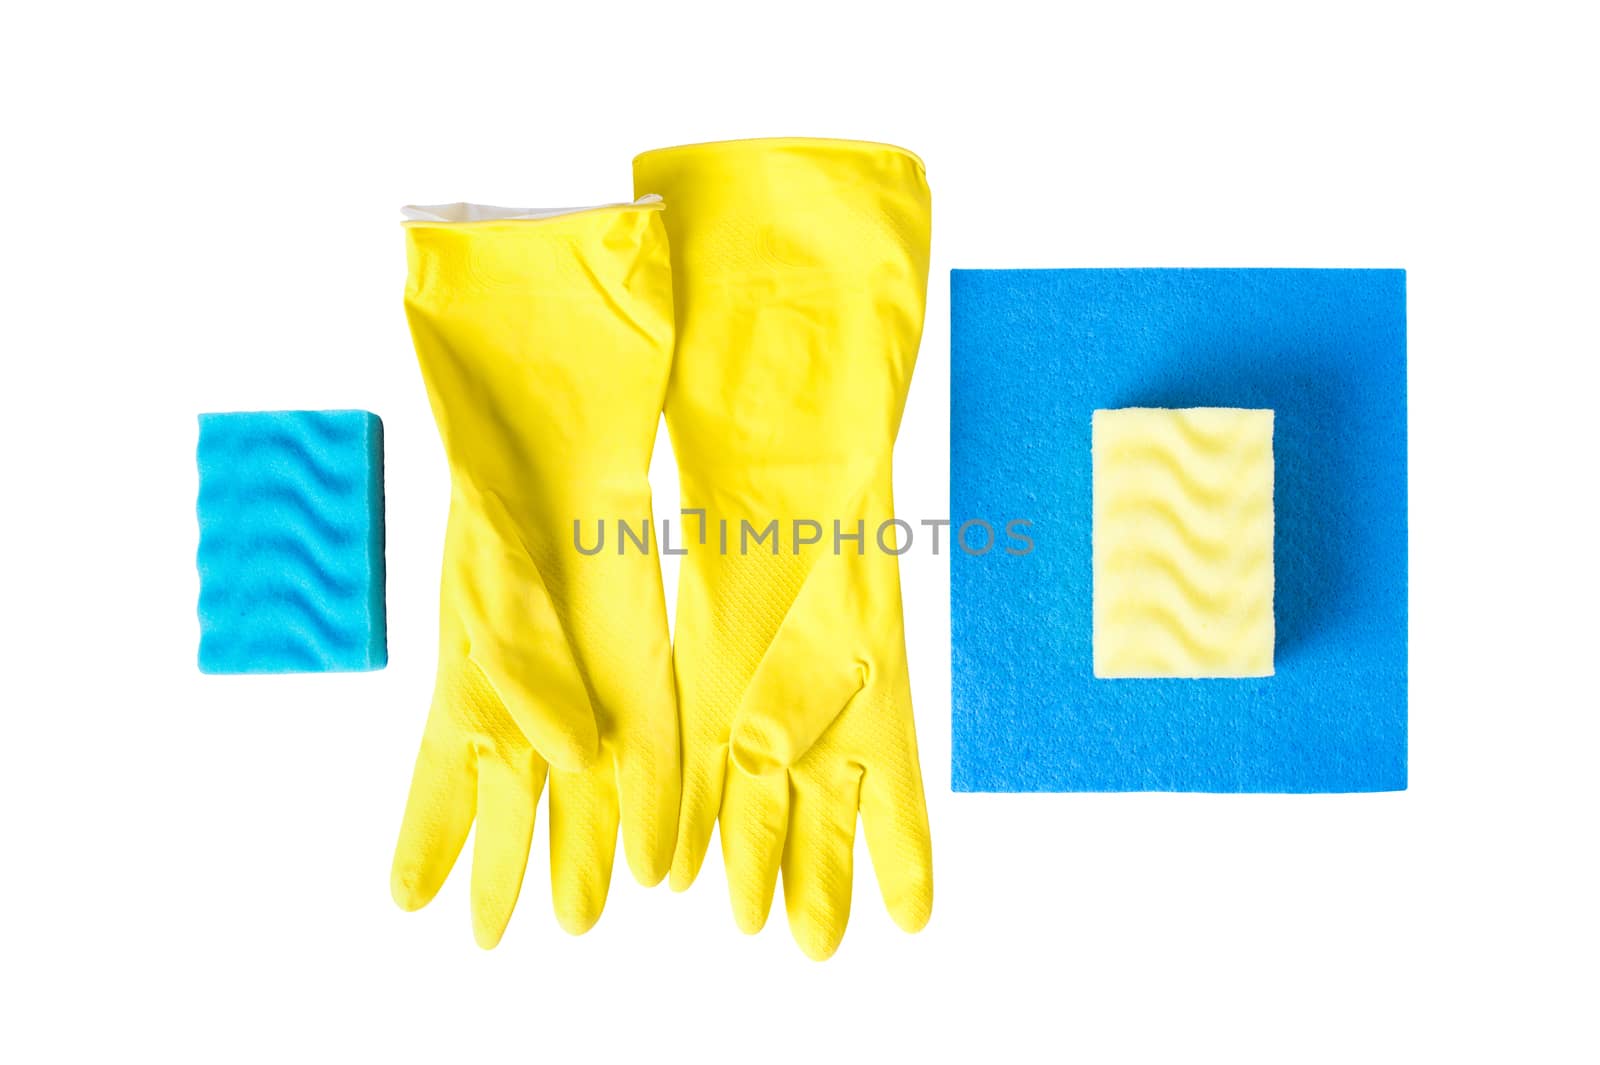 cleaning equipment isolated on a white background: yellow rubber gloves, sponges for washing dishes, cleaning cloths with hearts, the concept of clea